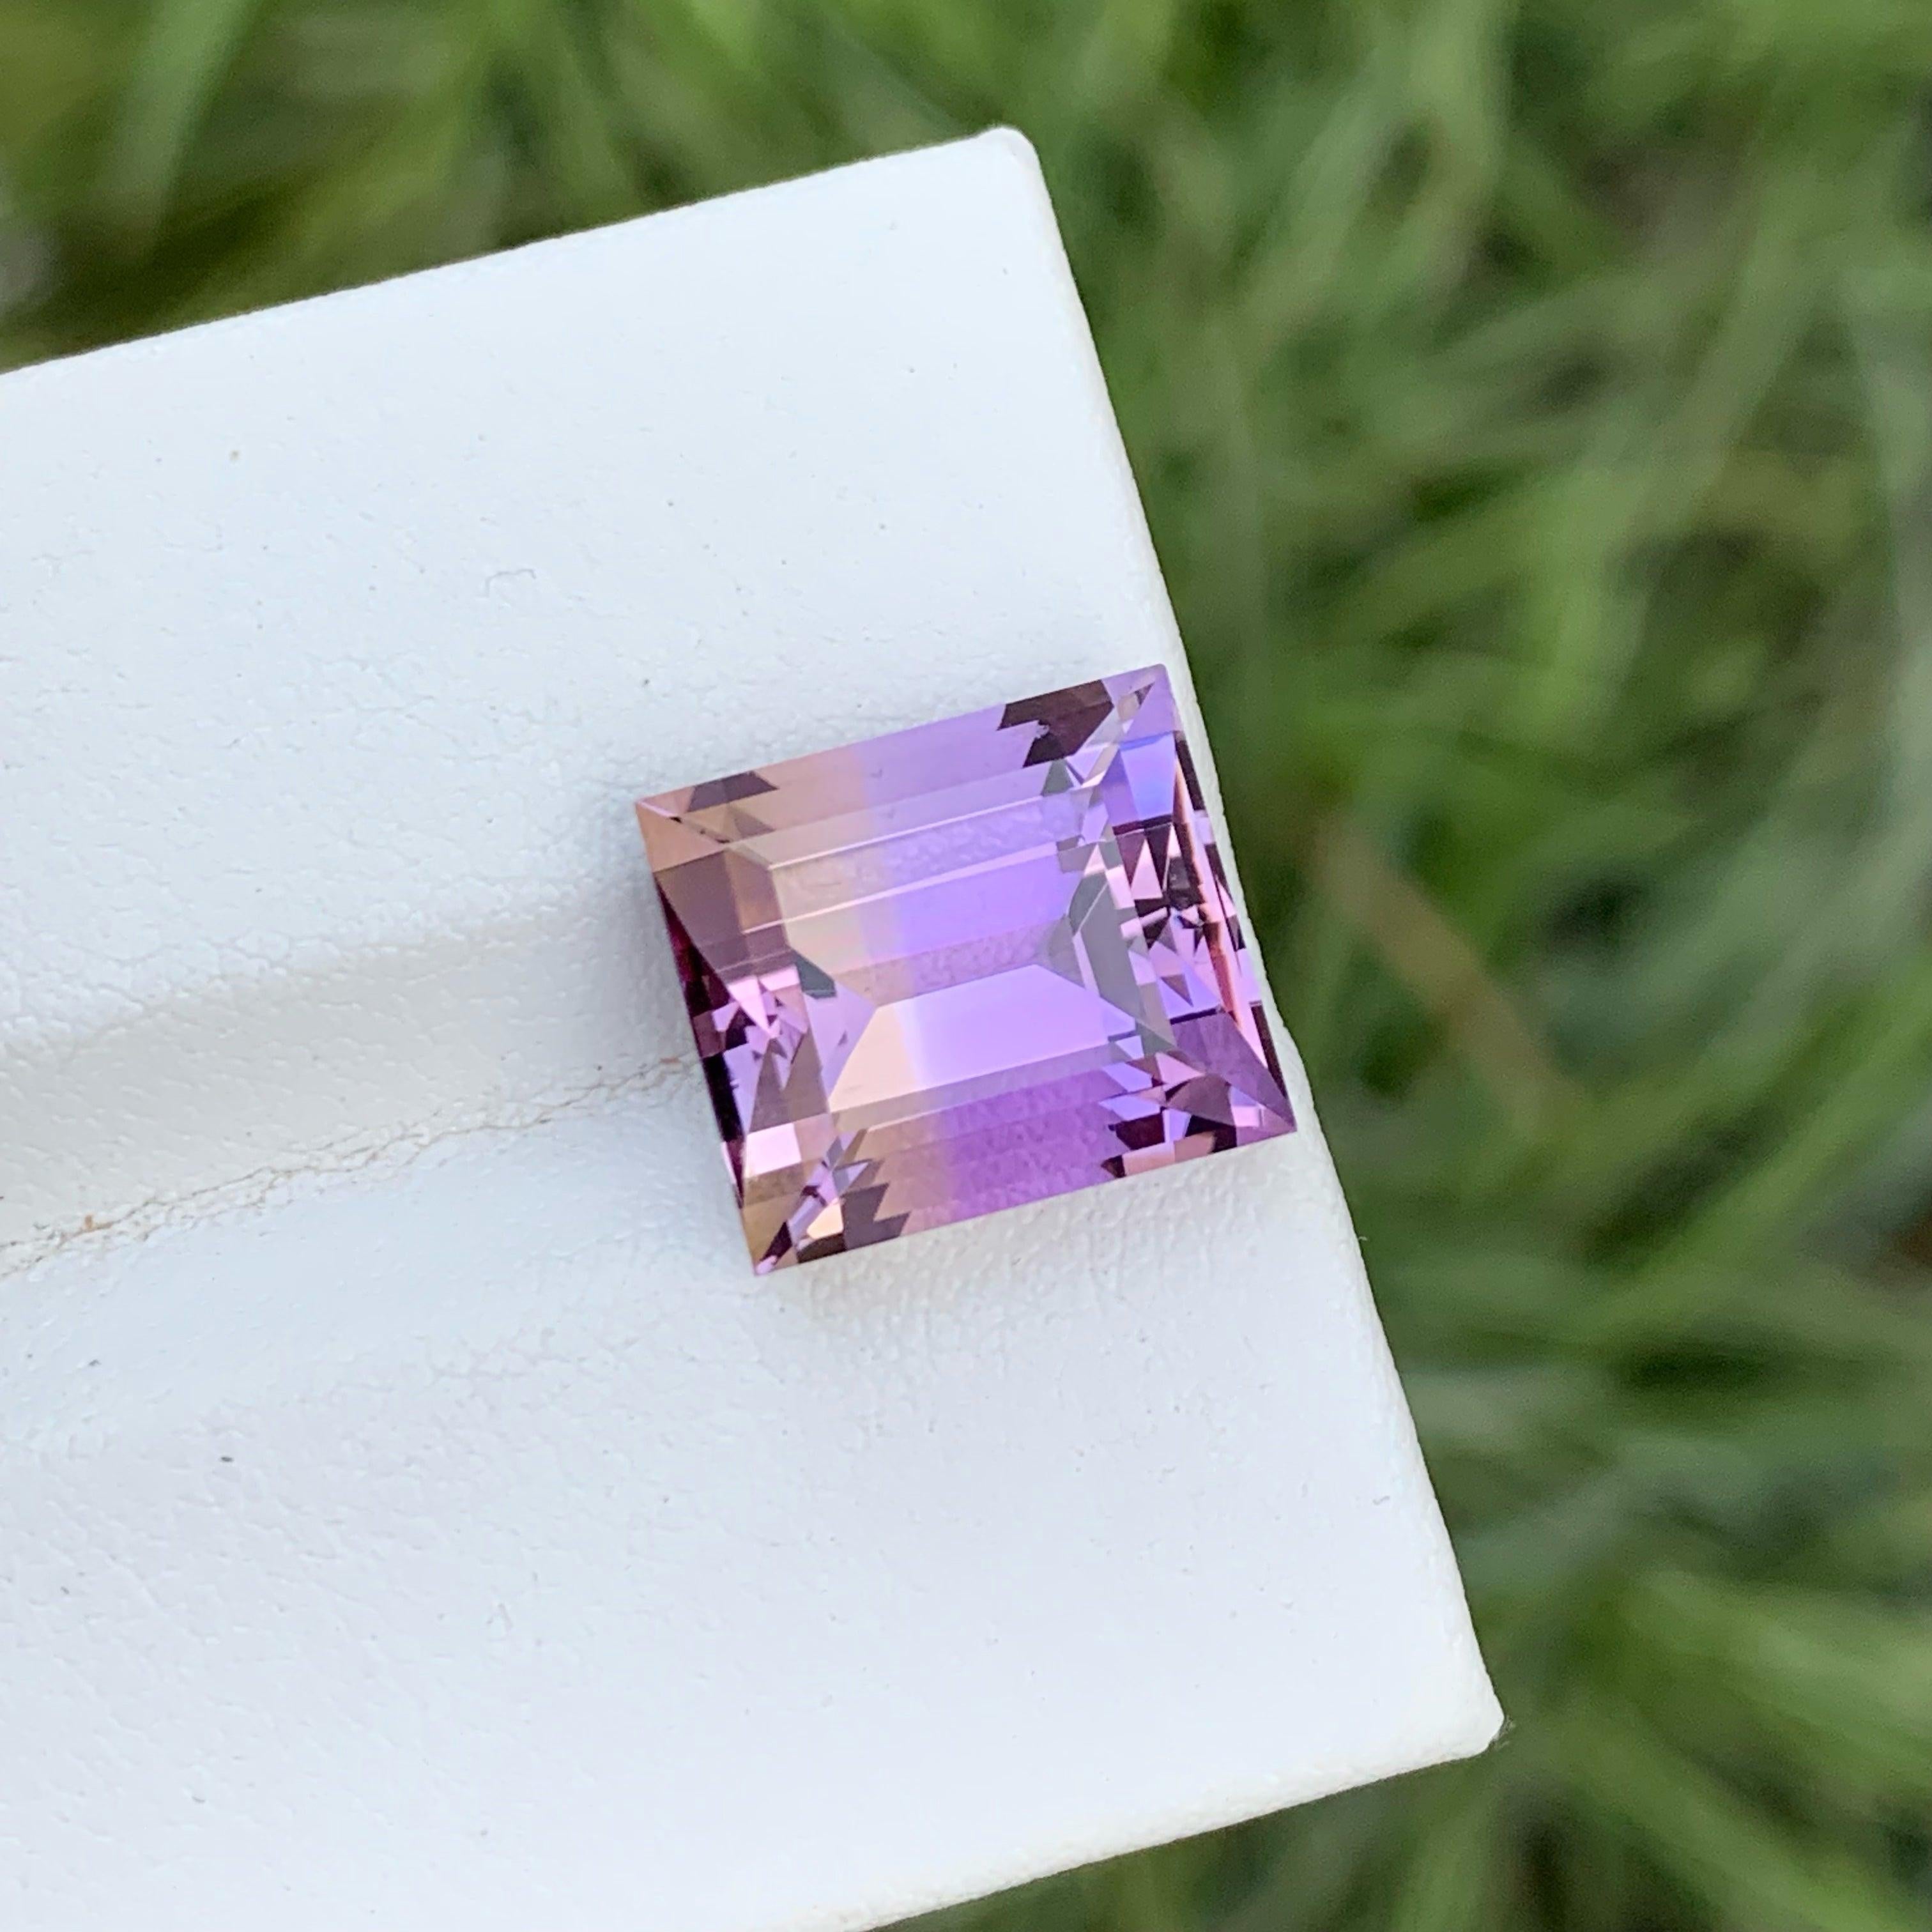 Exquisite Natural Ametrine Loose Gemstone, Available for sale at wholesale price natural high quality 10.30 Carats Loupe Clean Clarity Natural Ametrine From Bolivia.

Product Information:
GEMSTONE TYPE:	Exquisite Natural Ametrine Loose